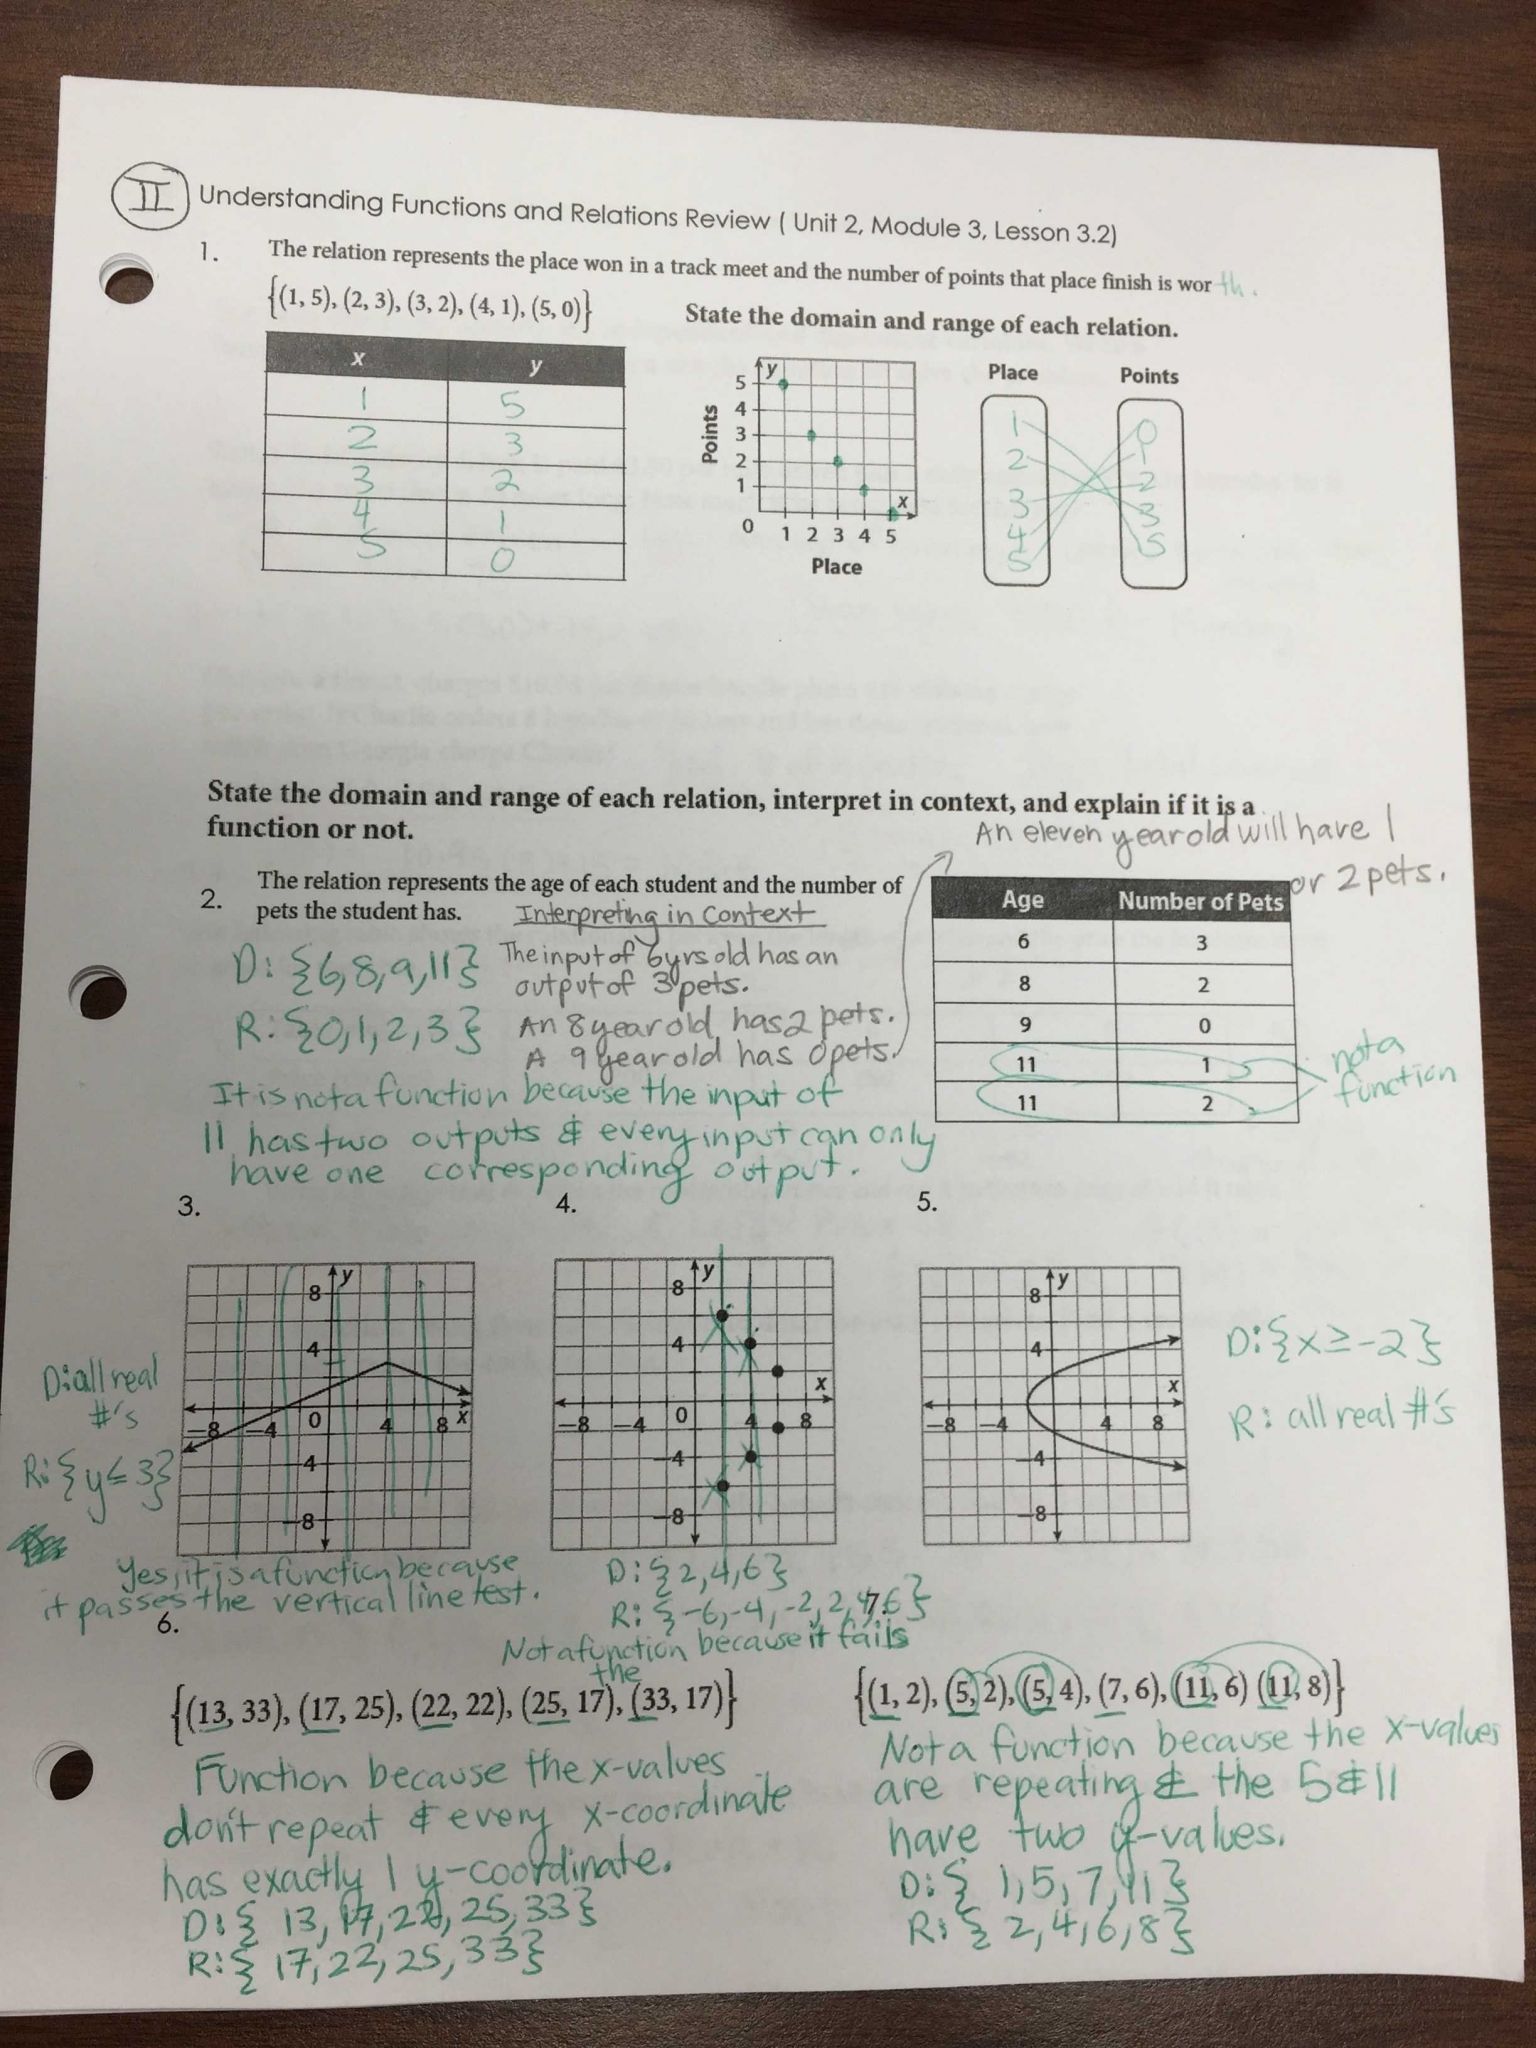 Graphing Exponential Functions Worksheet Answers as Well as Math Models Worksheet 41 Relations and Functions